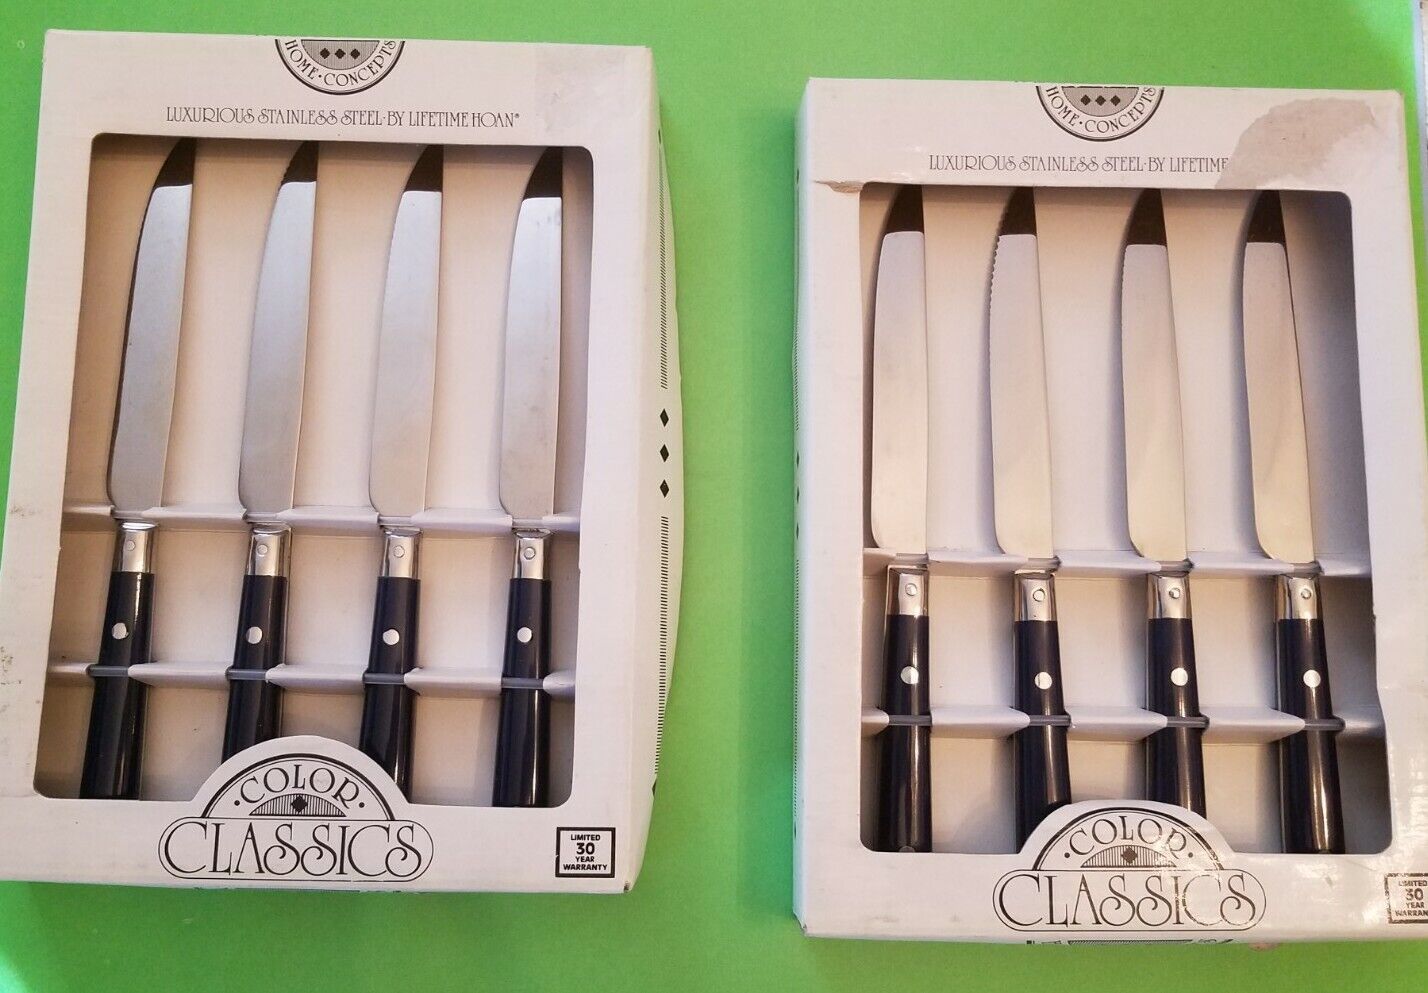 New 8 Pc Color Classics Home Concepts Stainless Lifetime Hoan Steak Knife Set 